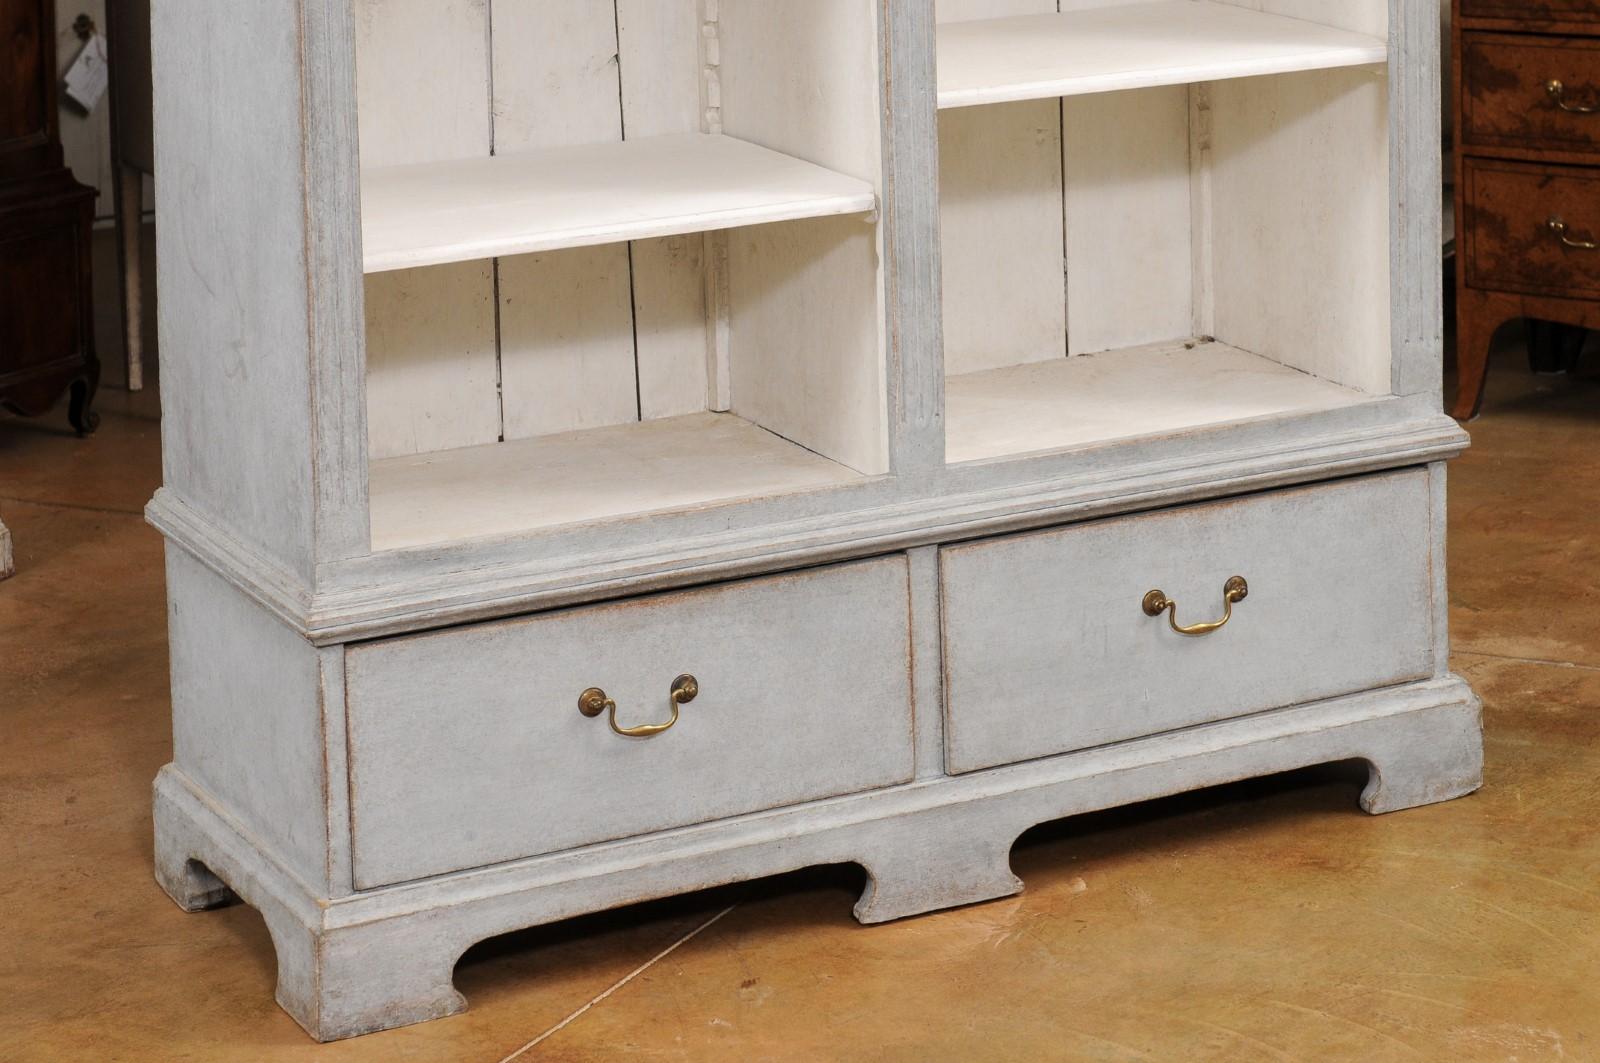  Swedish 1850s Gray Painted Bookcase with Open Shelves and Two Drawers In Good Condition For Sale In Atlanta, GA